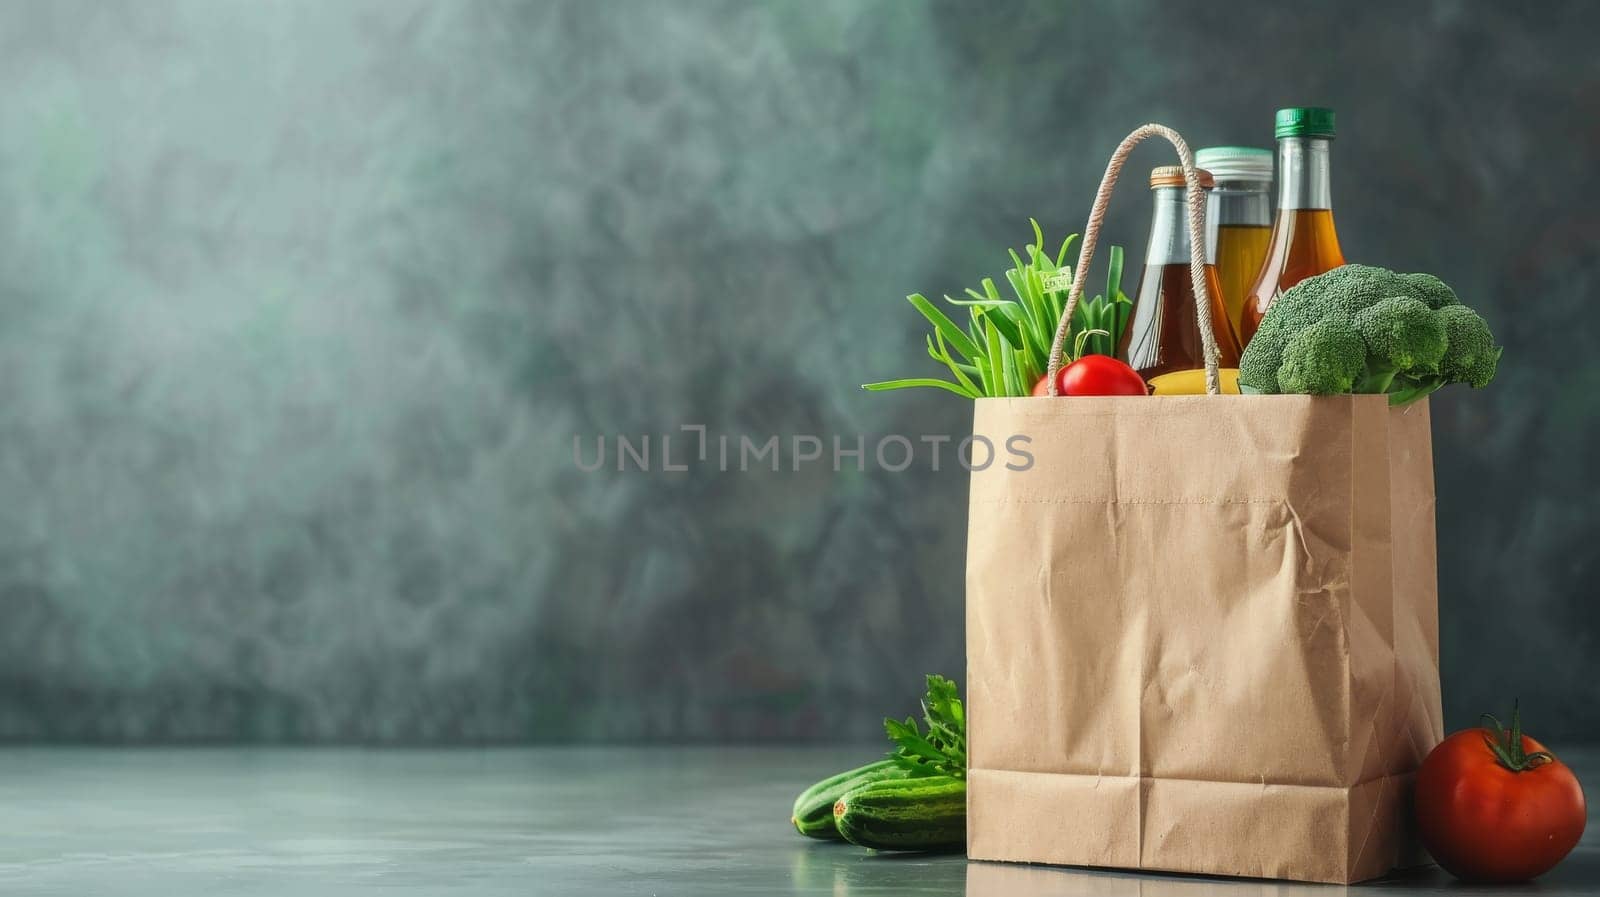 A bag of groceries with a variety of vegetables and a bottle of juice. The bag is brown and the vegetables are fresh and colorful